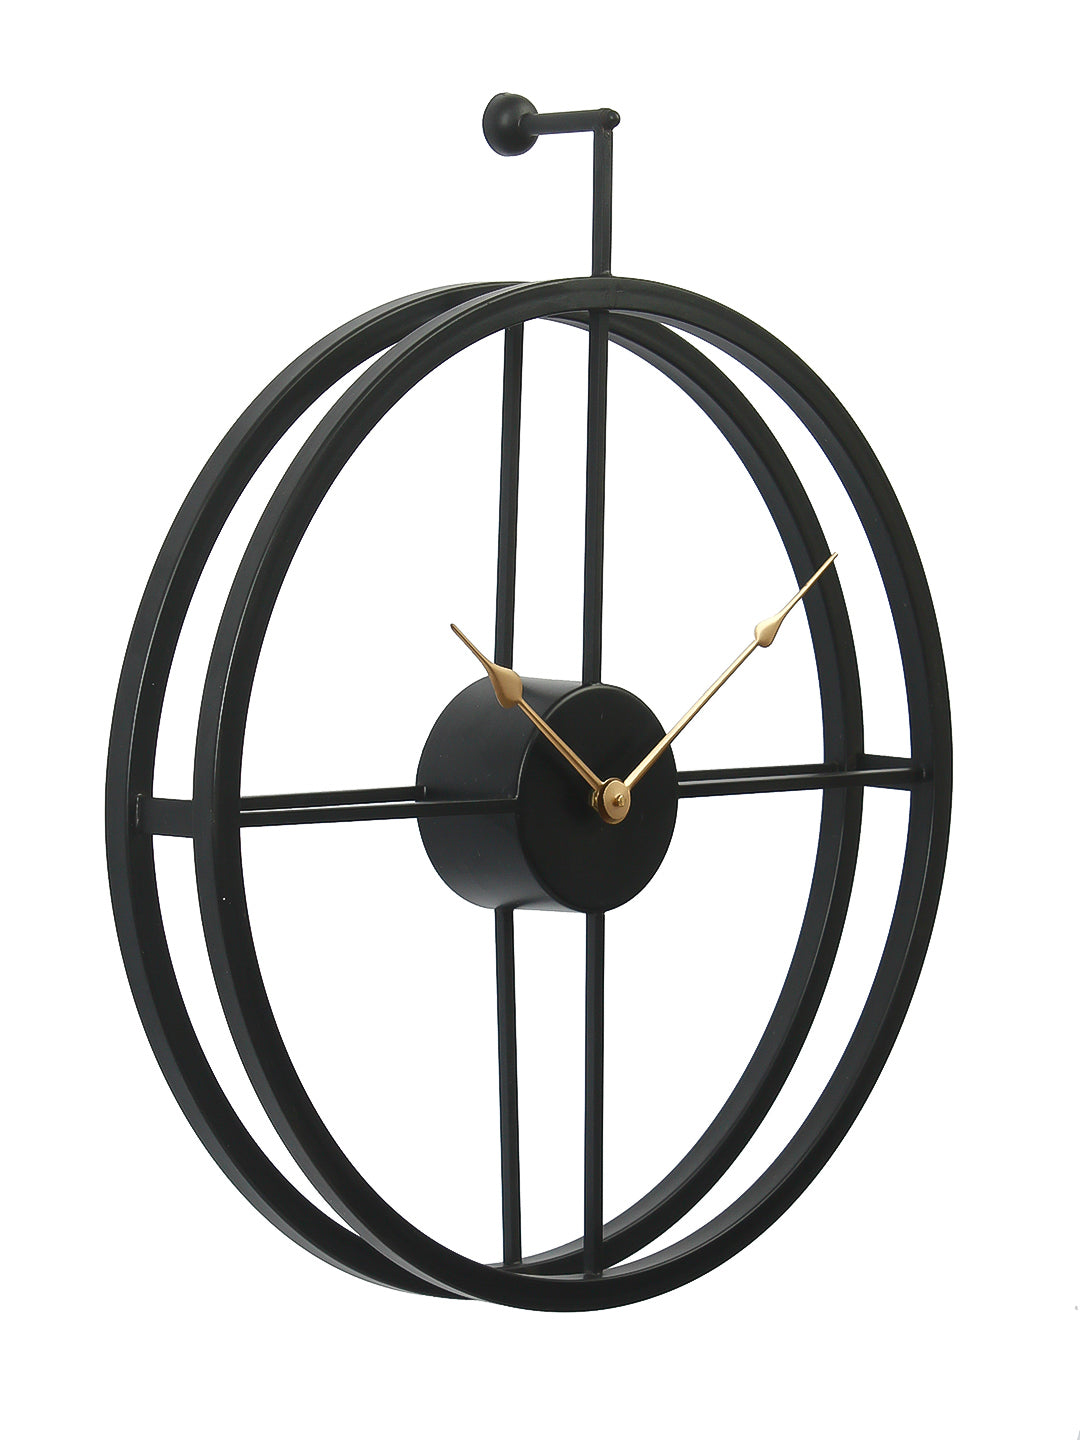 Black Iron Round Handcrafted Modern Wall Clock Without Glass and numbers 5